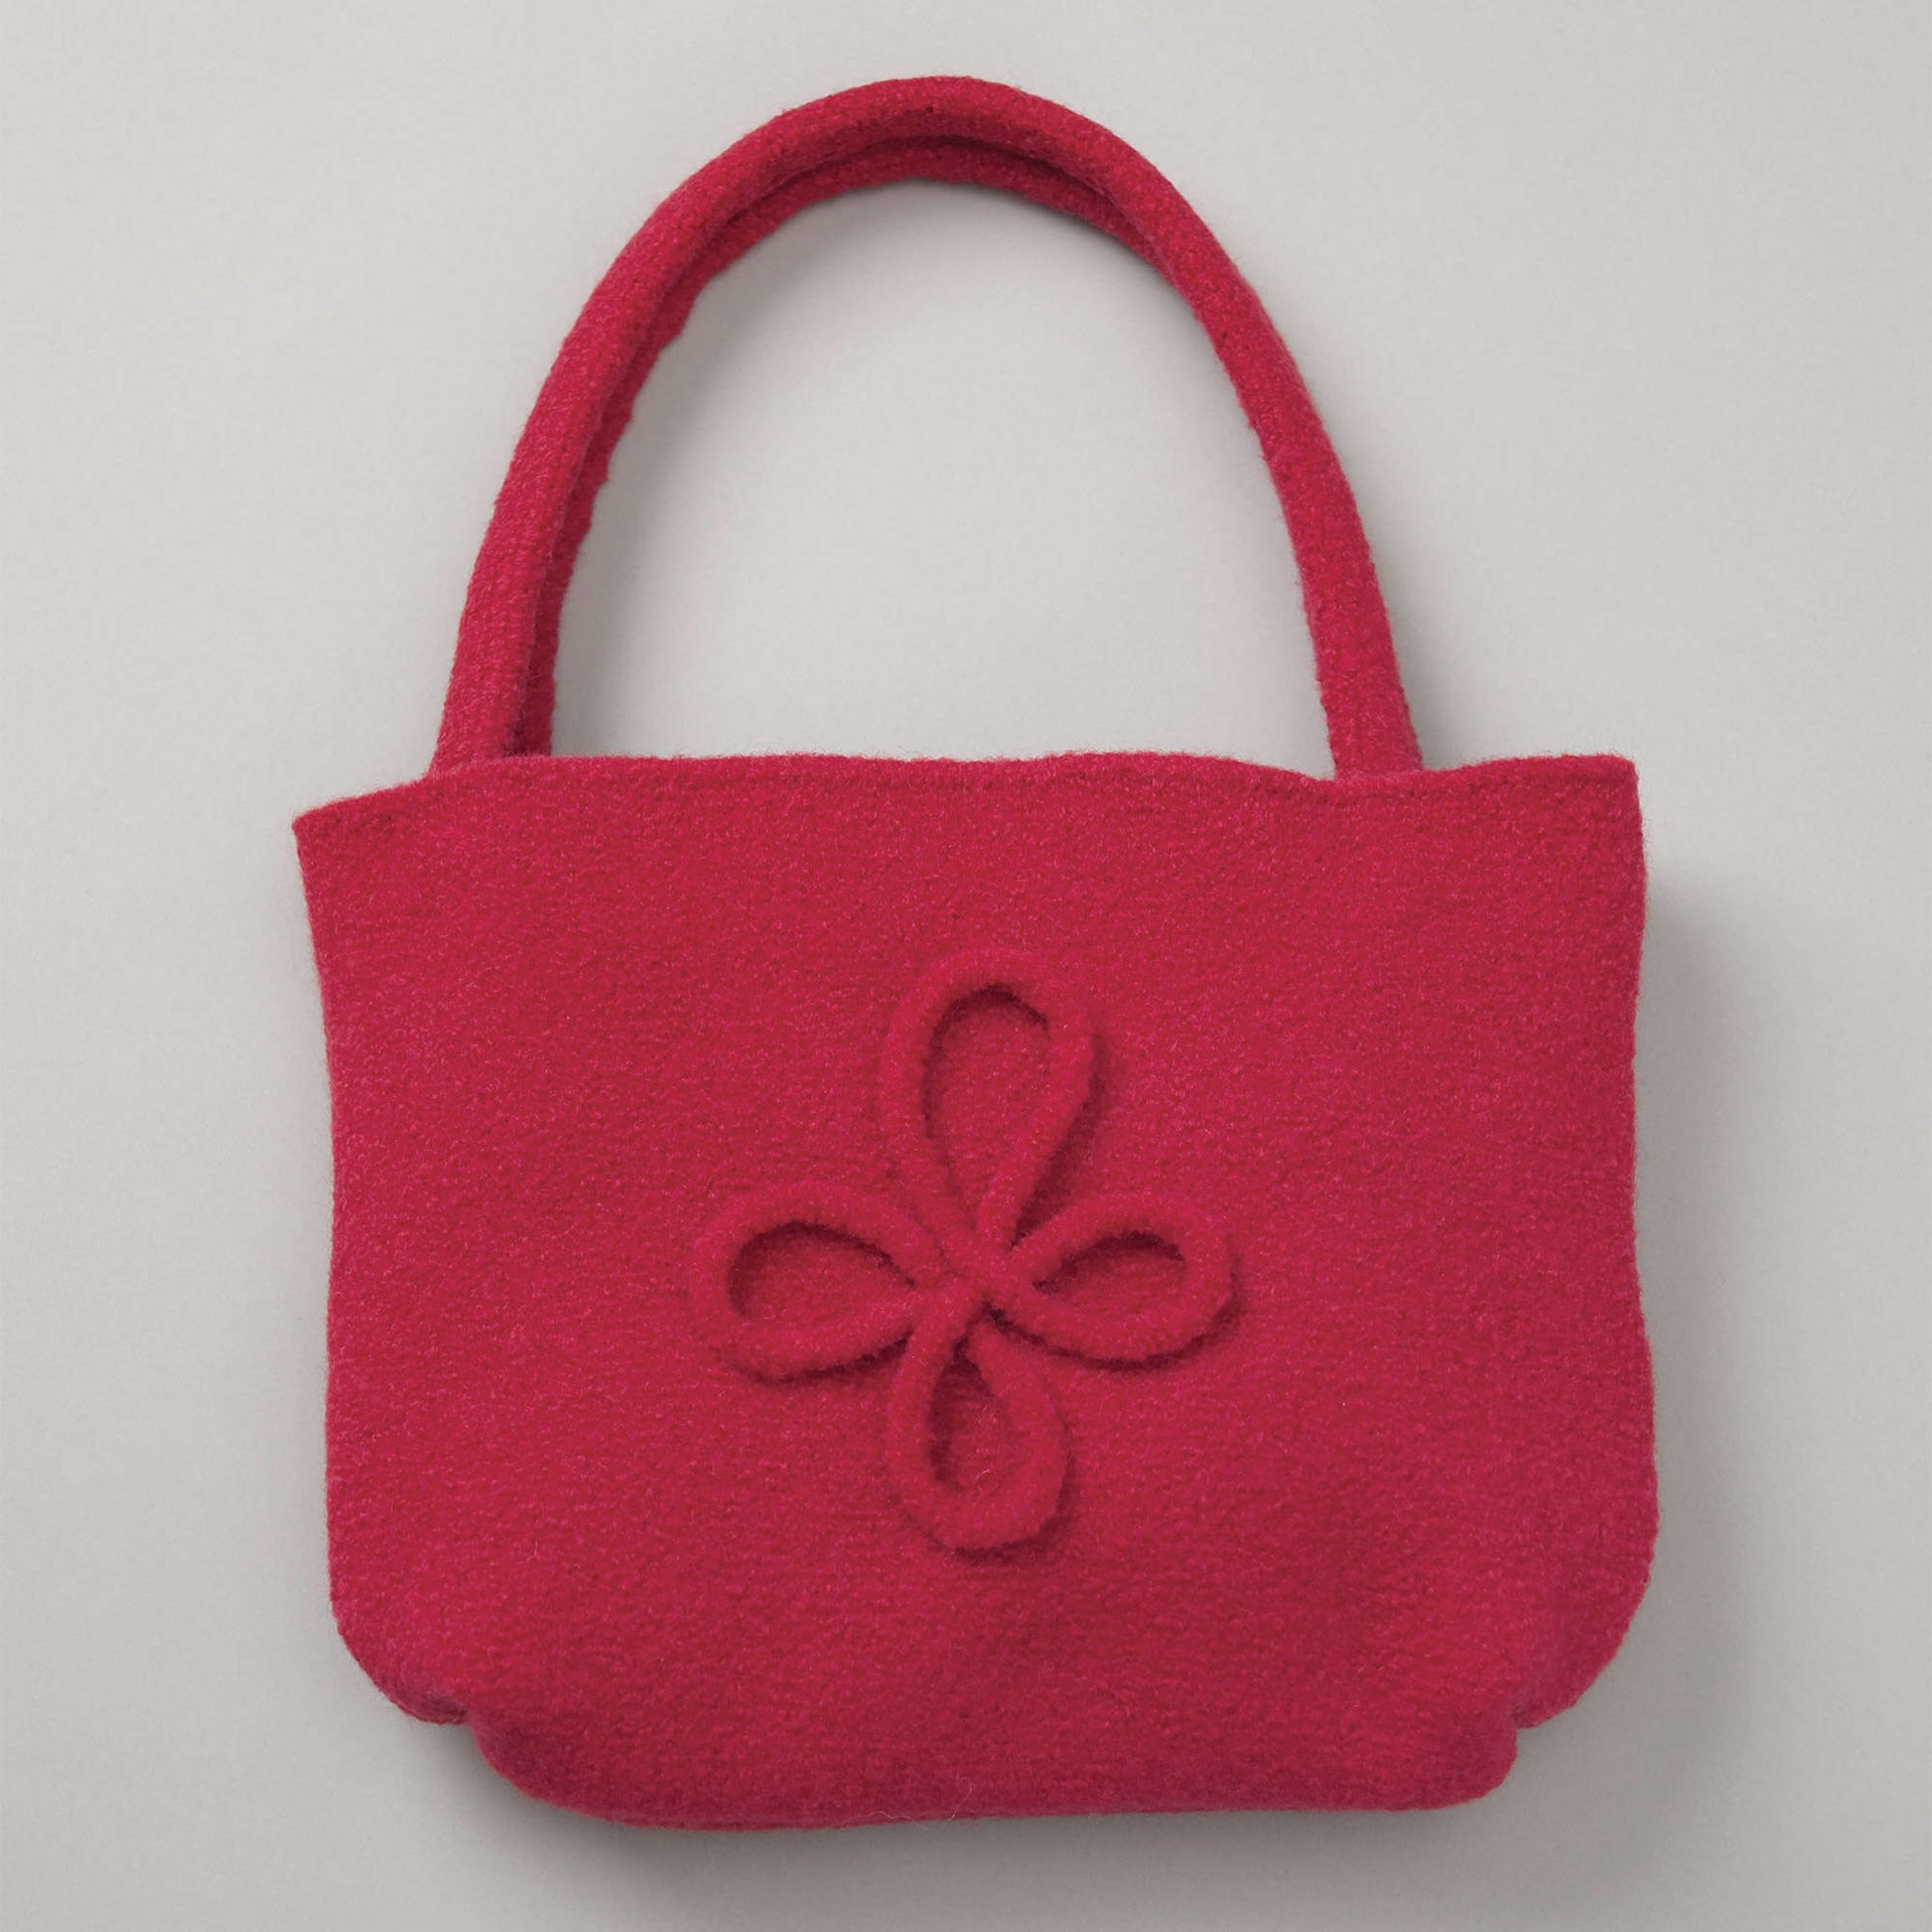 Free Patons Felted Bag With Motif Knit Pattern